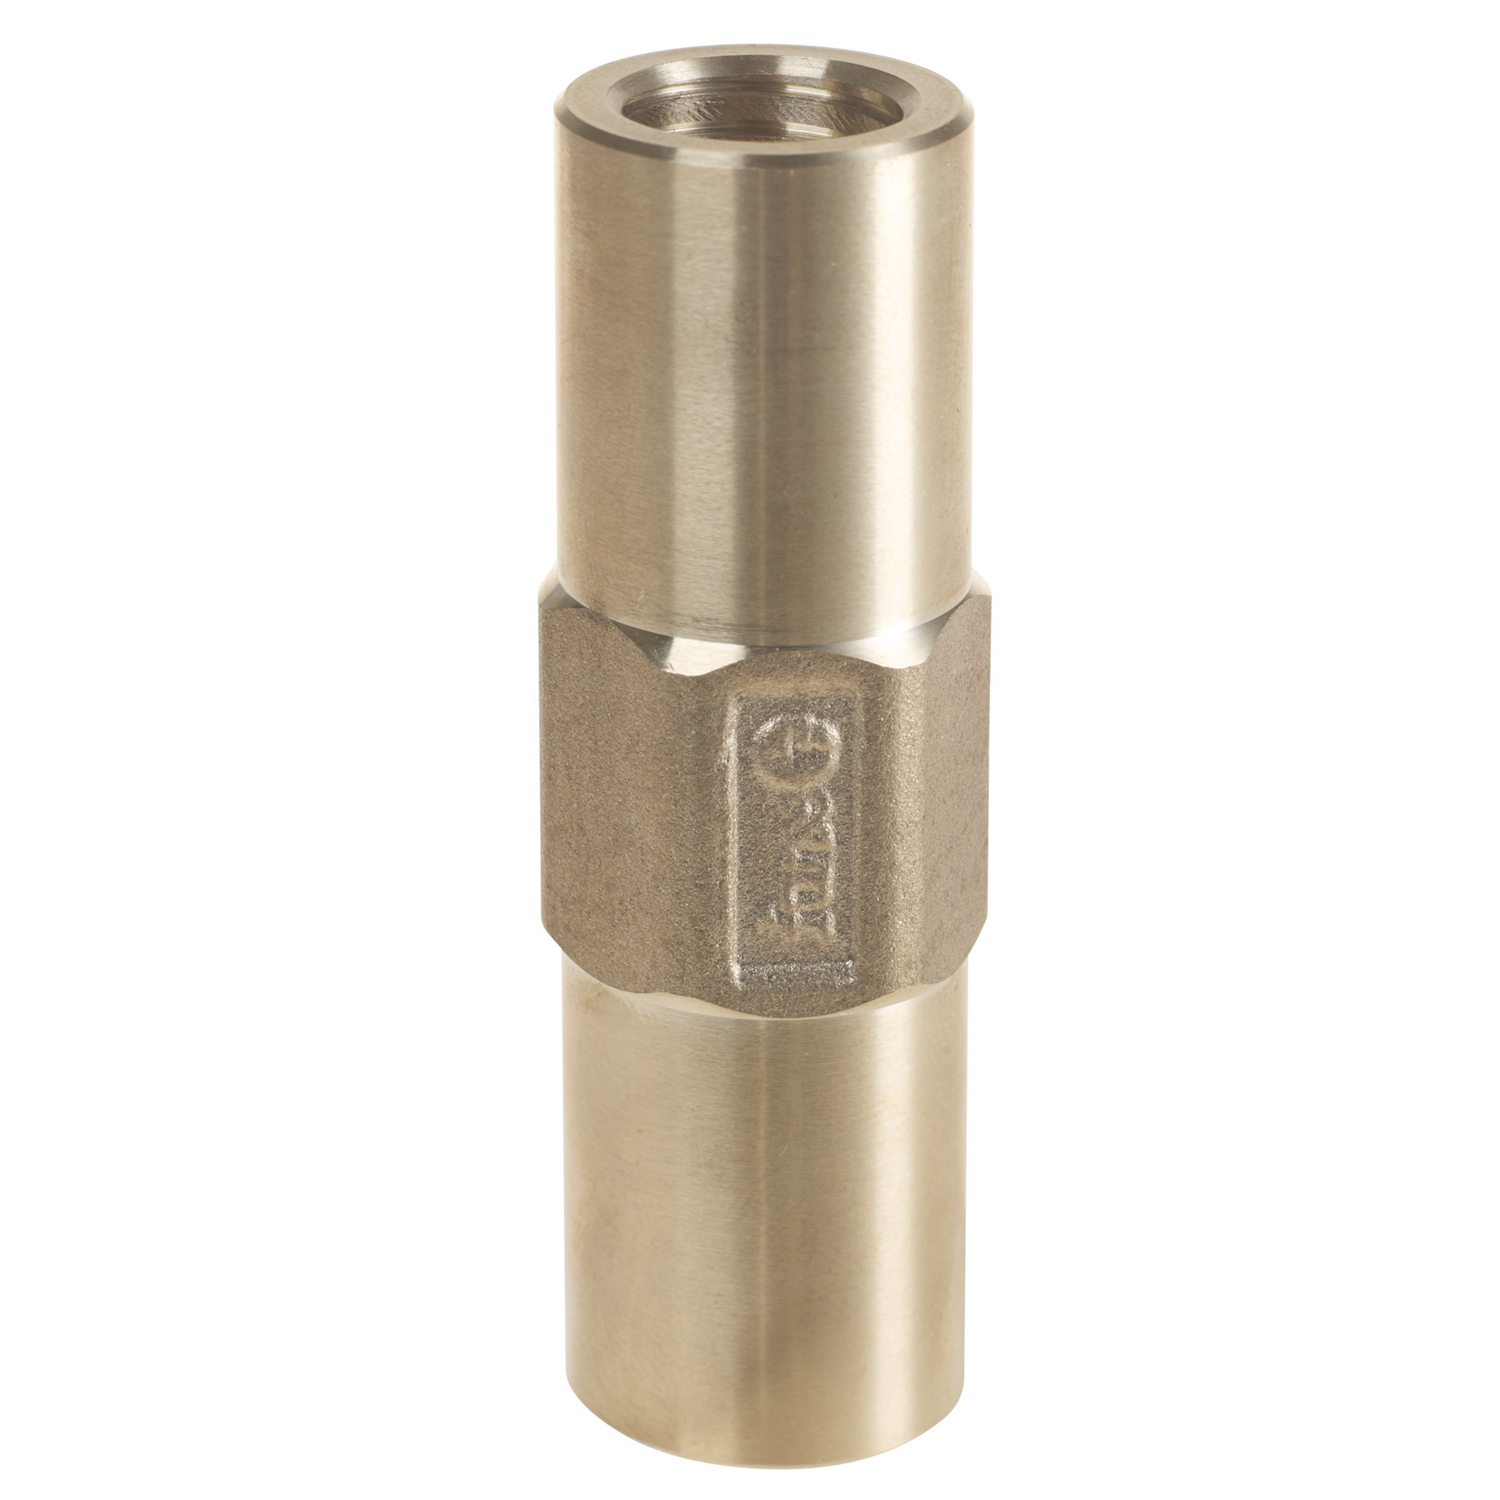 1/2" Taper Earth Rod Coupling, 13mm